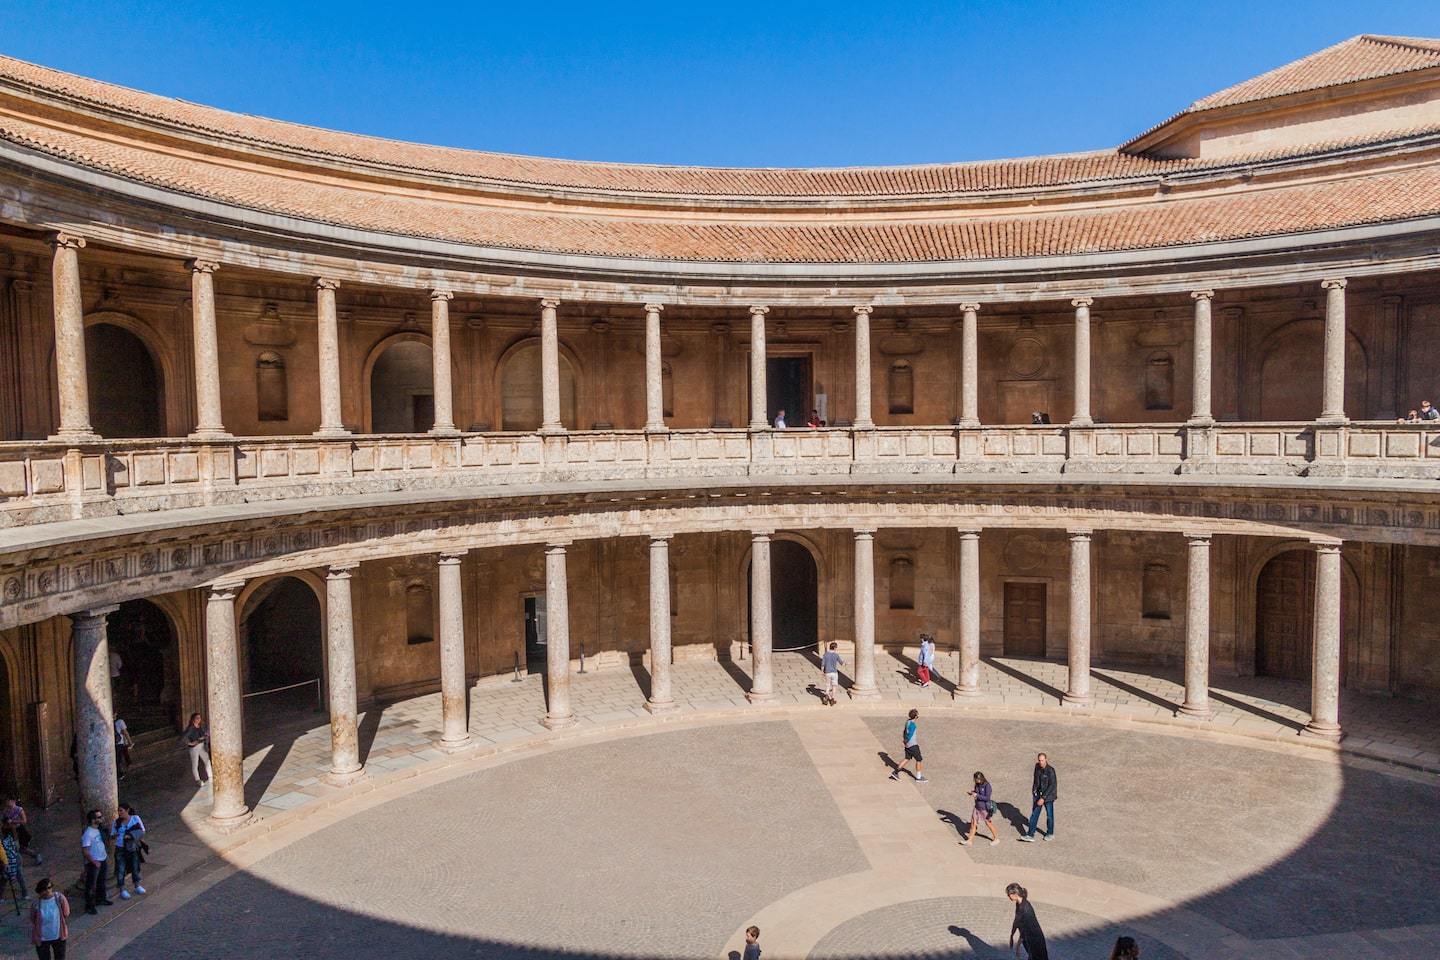 circular structure with pillars and openings around a central courtyard